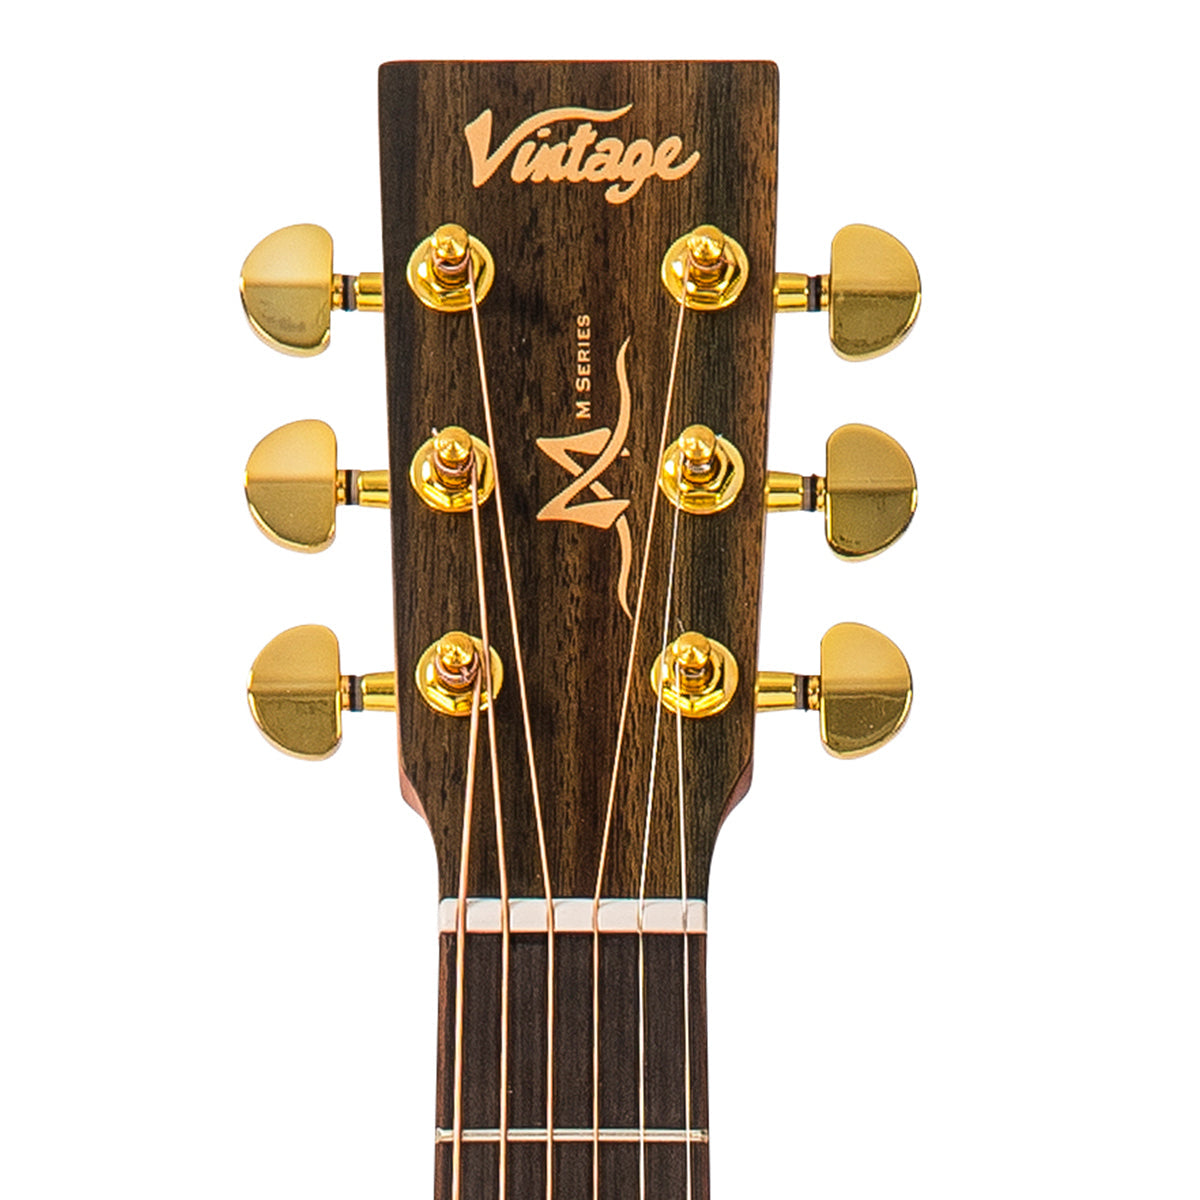 Vintage Mahogany Series 'Travel' Electro-Acoustic Guitar ~ Satin Mahogany, Electric Acoustic Guitars for sale at Richards Guitars.